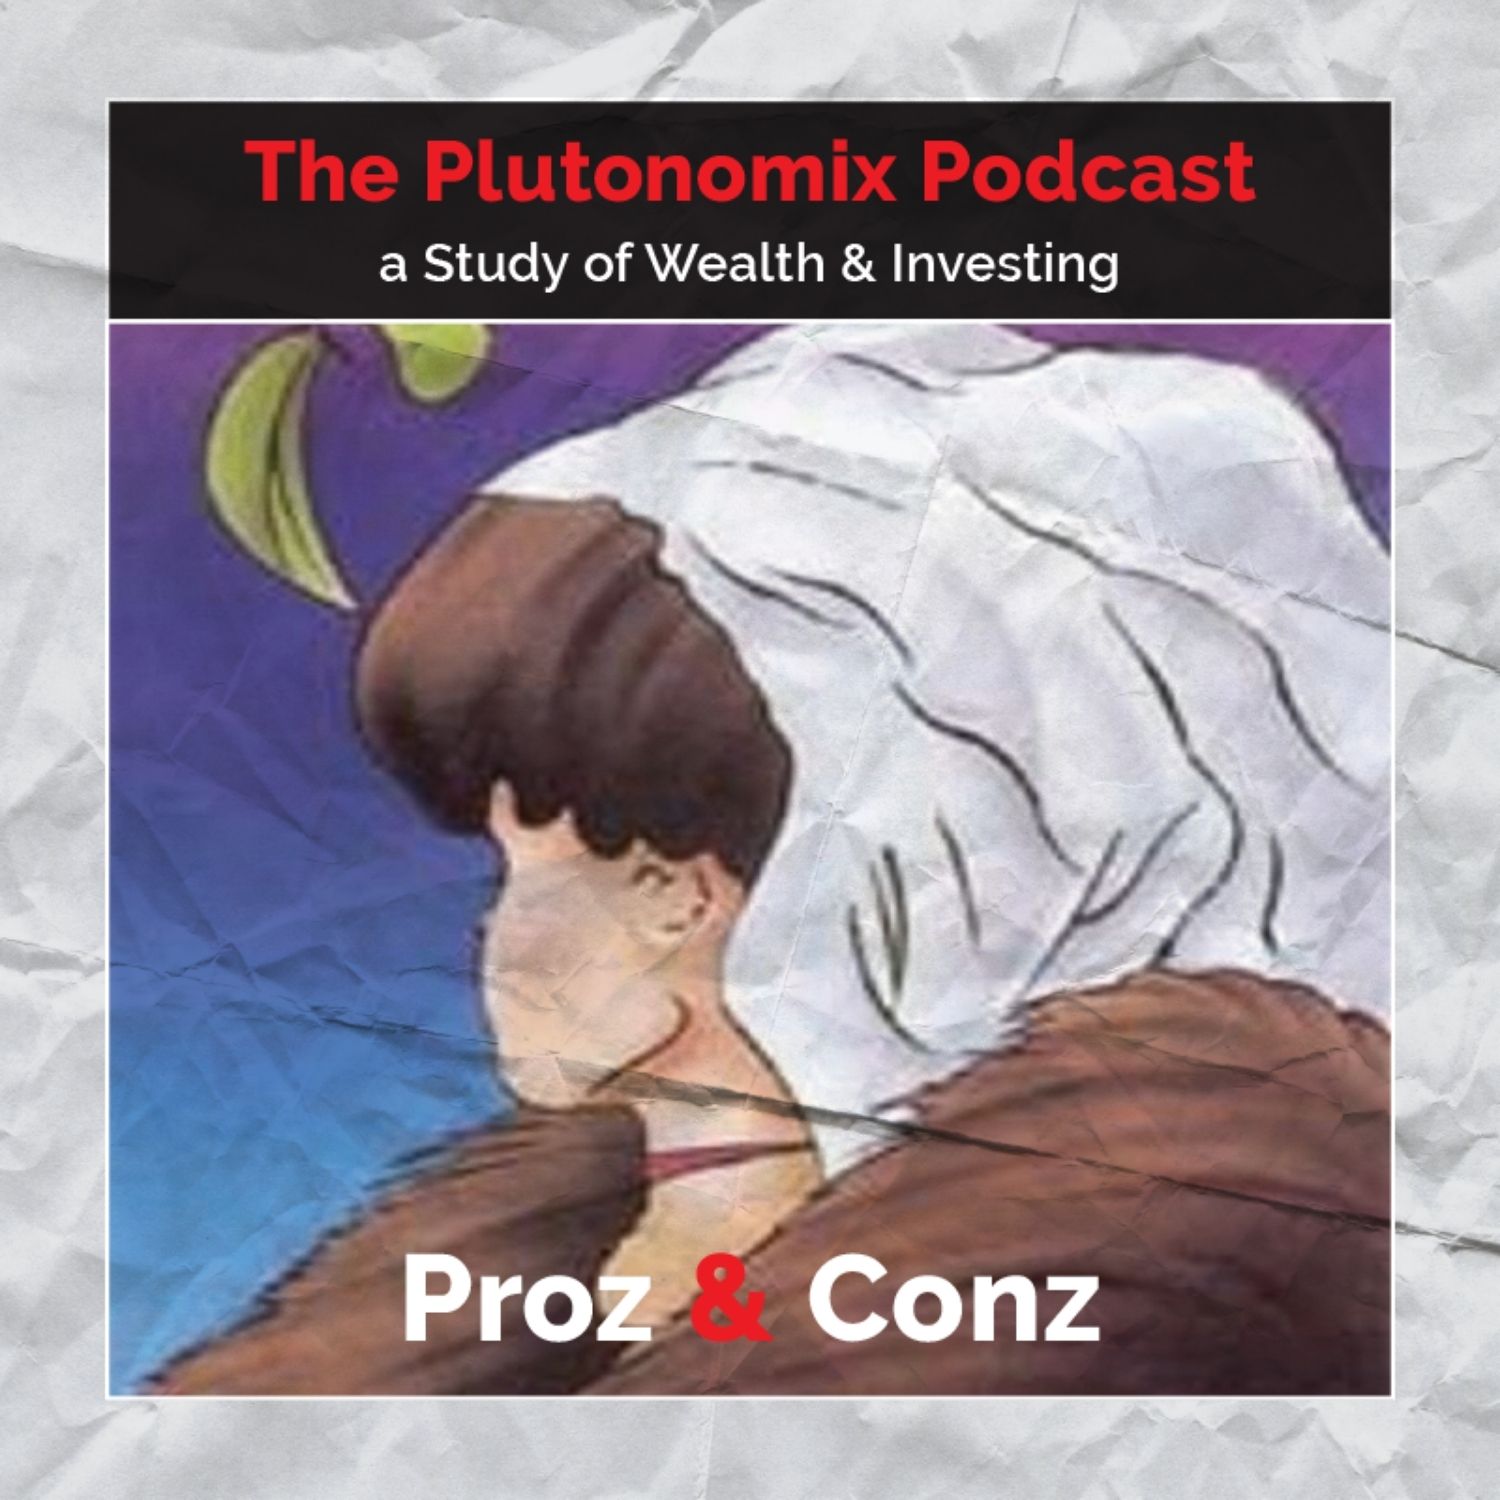 The Plutonomix Podcast: Proz & Conz - A Study of Wealth & Investing